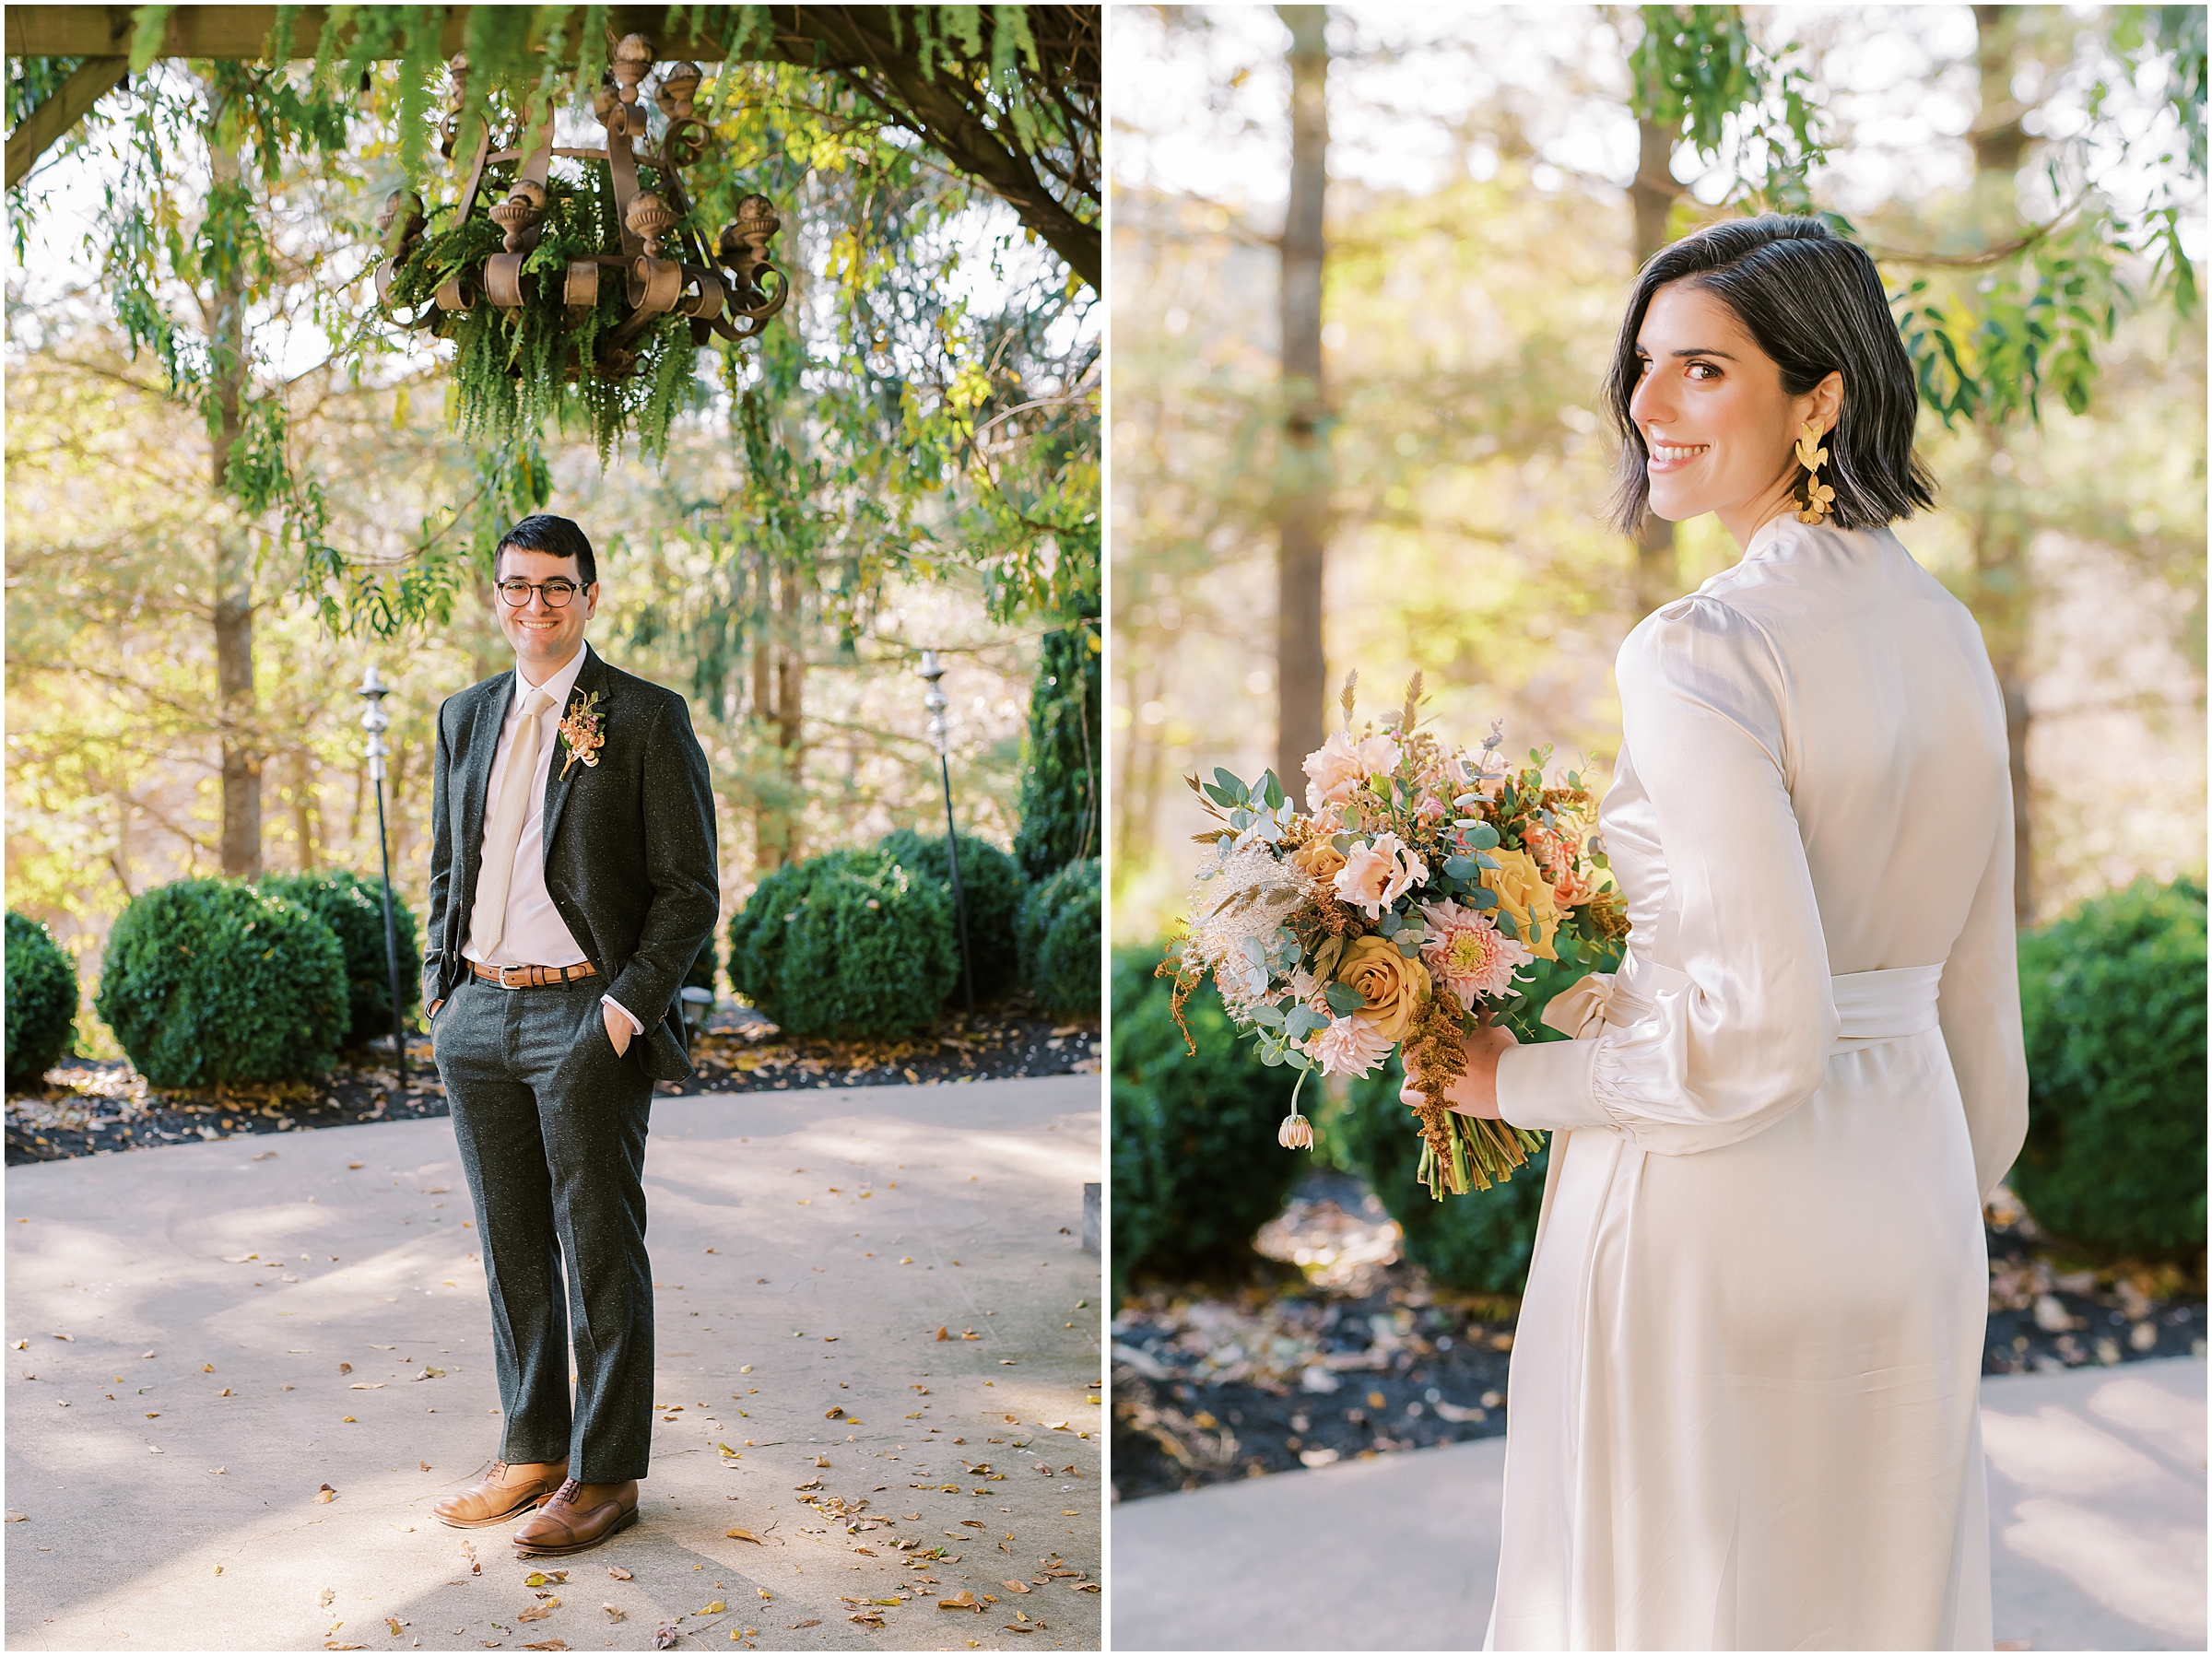 Individual portraits of bride and groom